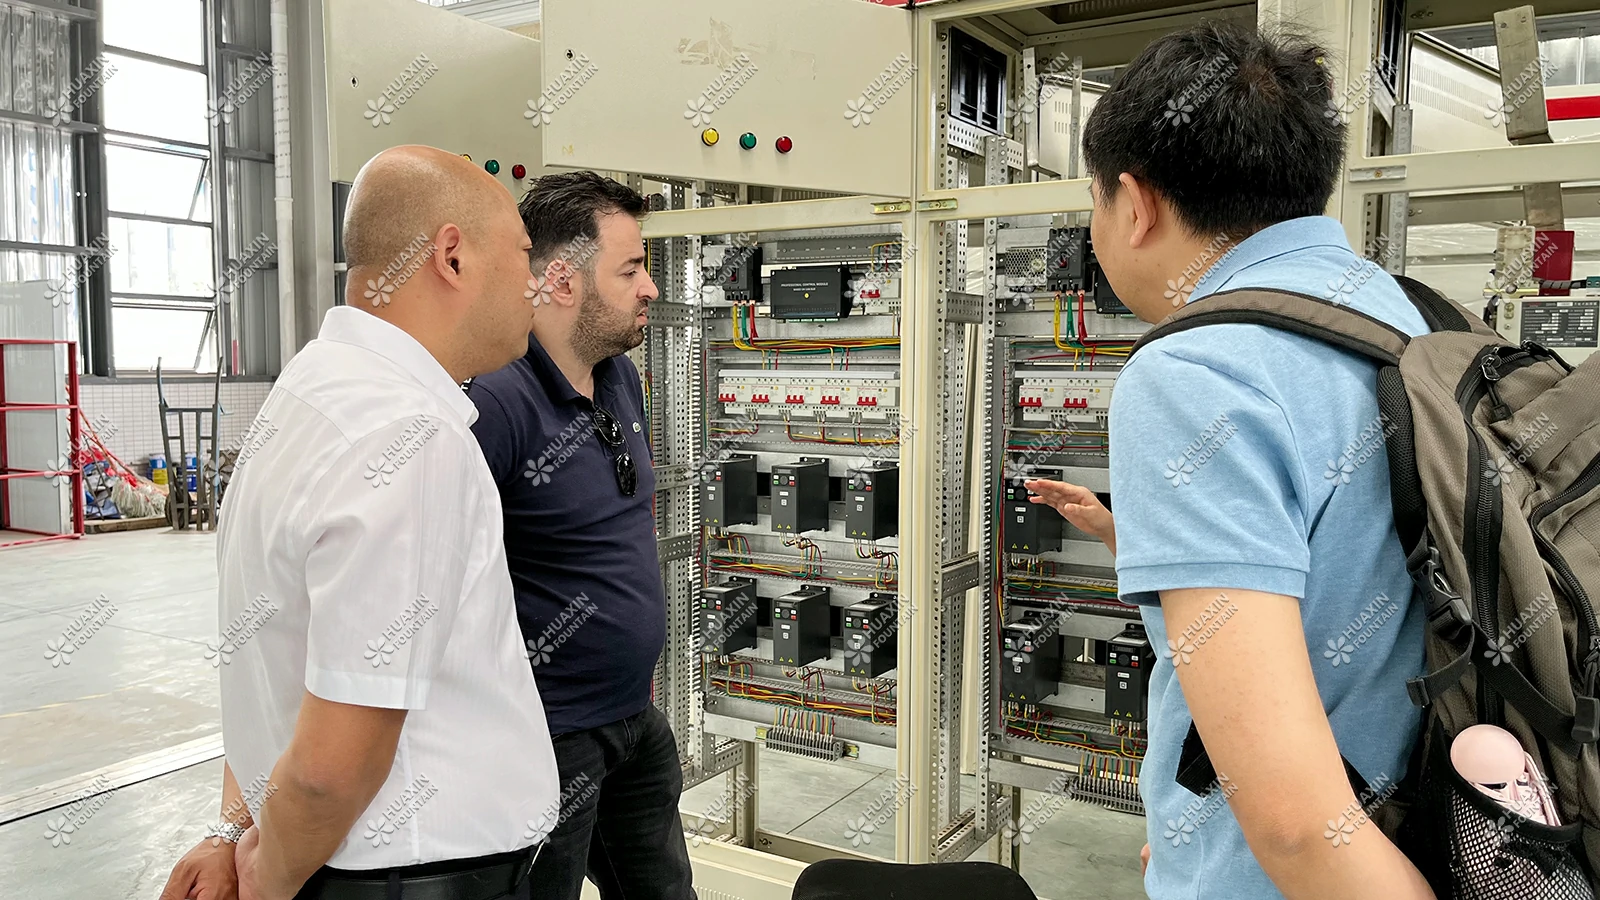 An Iraqi Customer Visited Huaxin Fountain Factory - Explain The Fountain Control System To The Customer